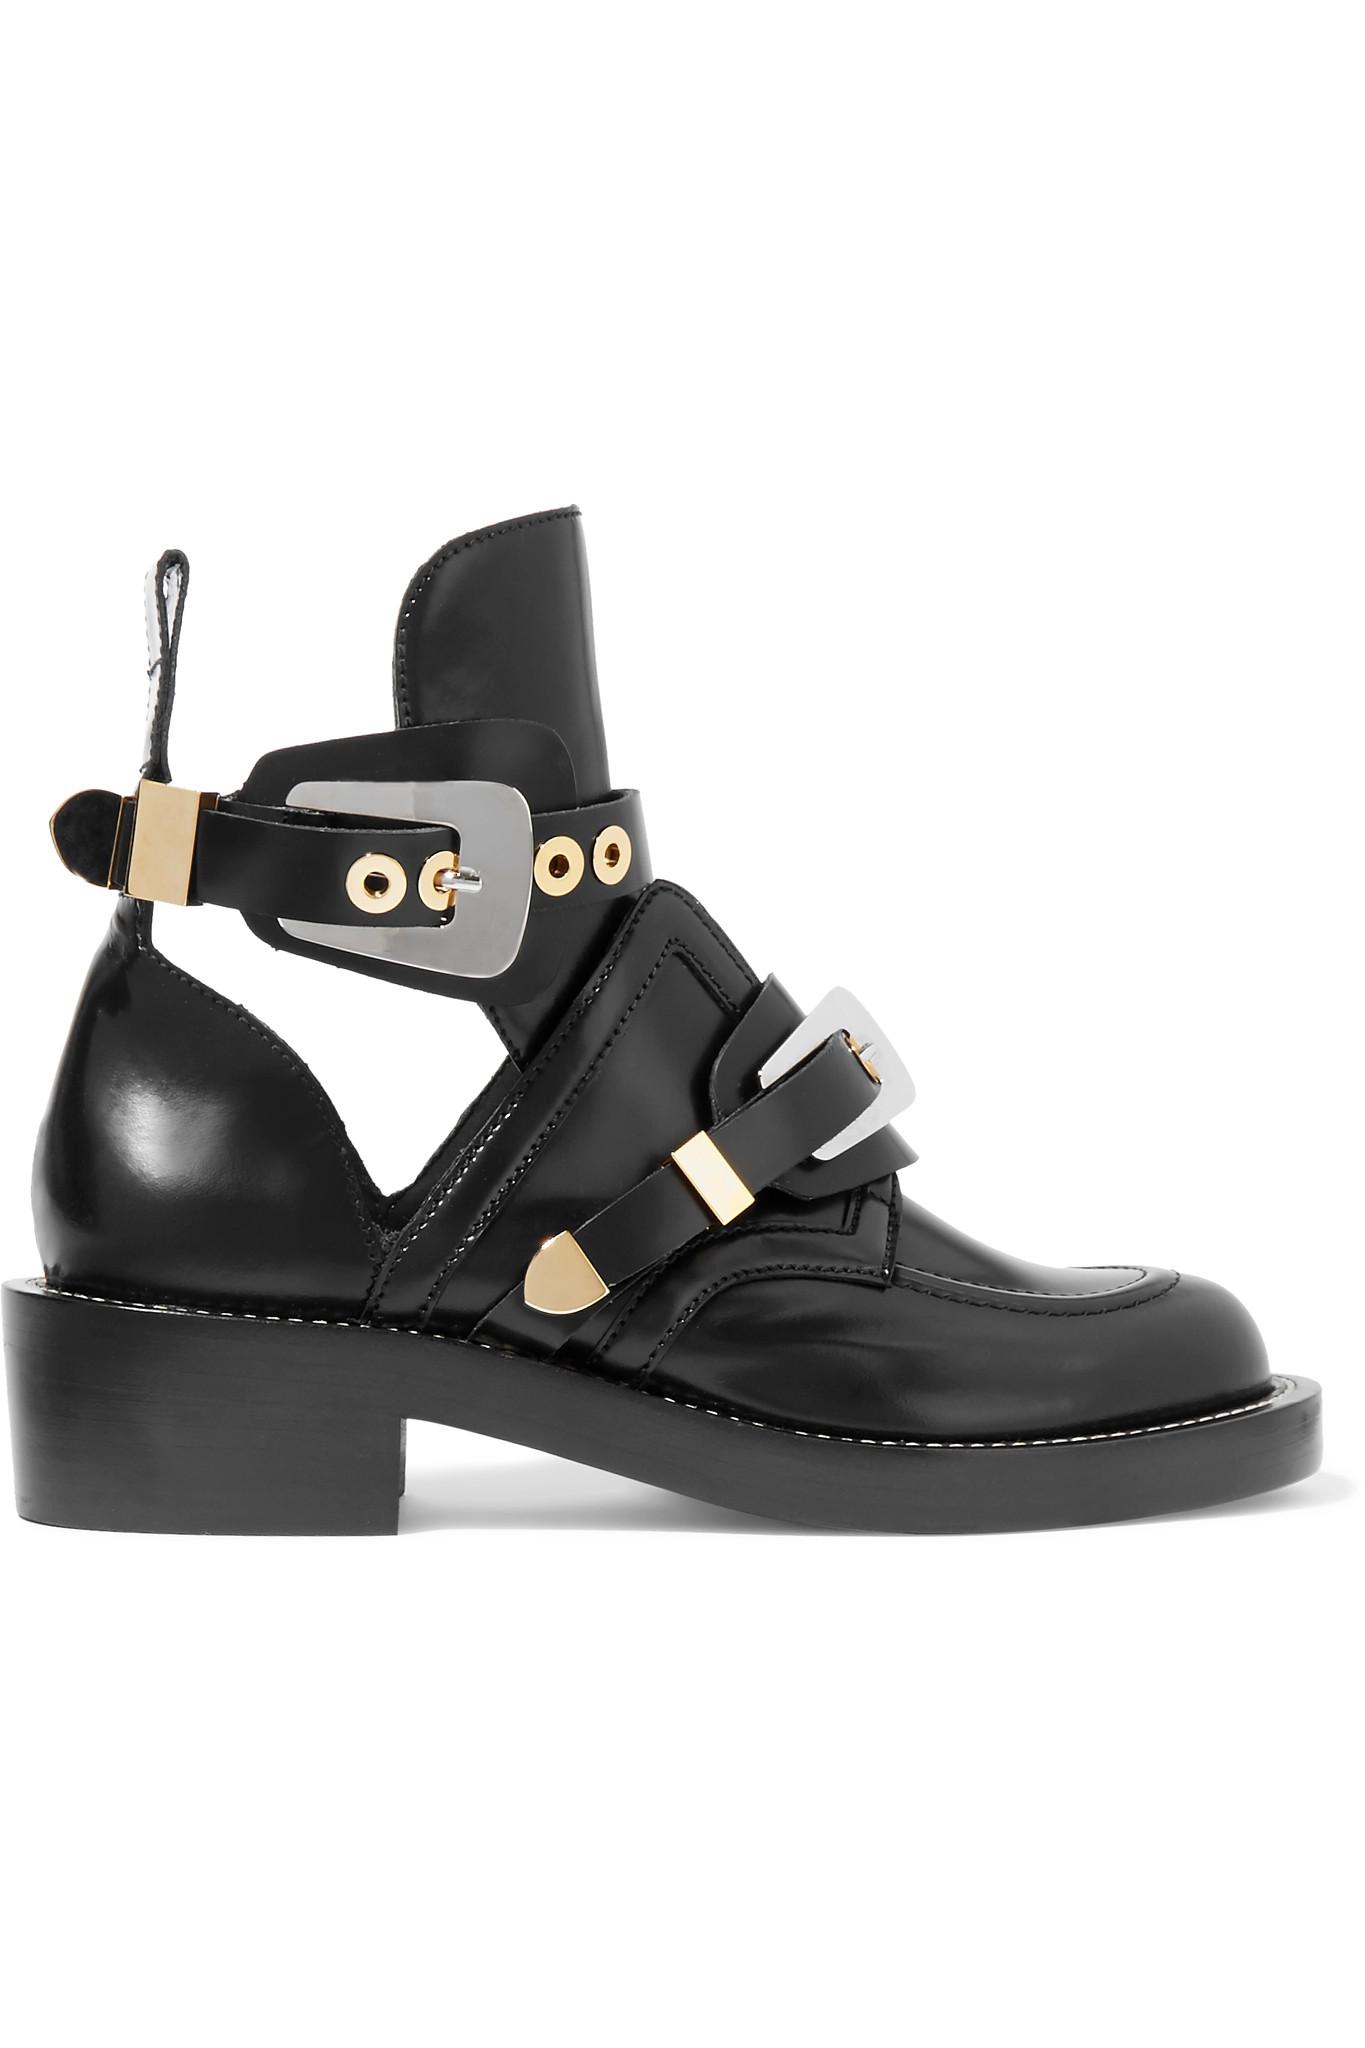 Balenciaga Cutout Glossed-leather Ankle Boots in Black - Lyst